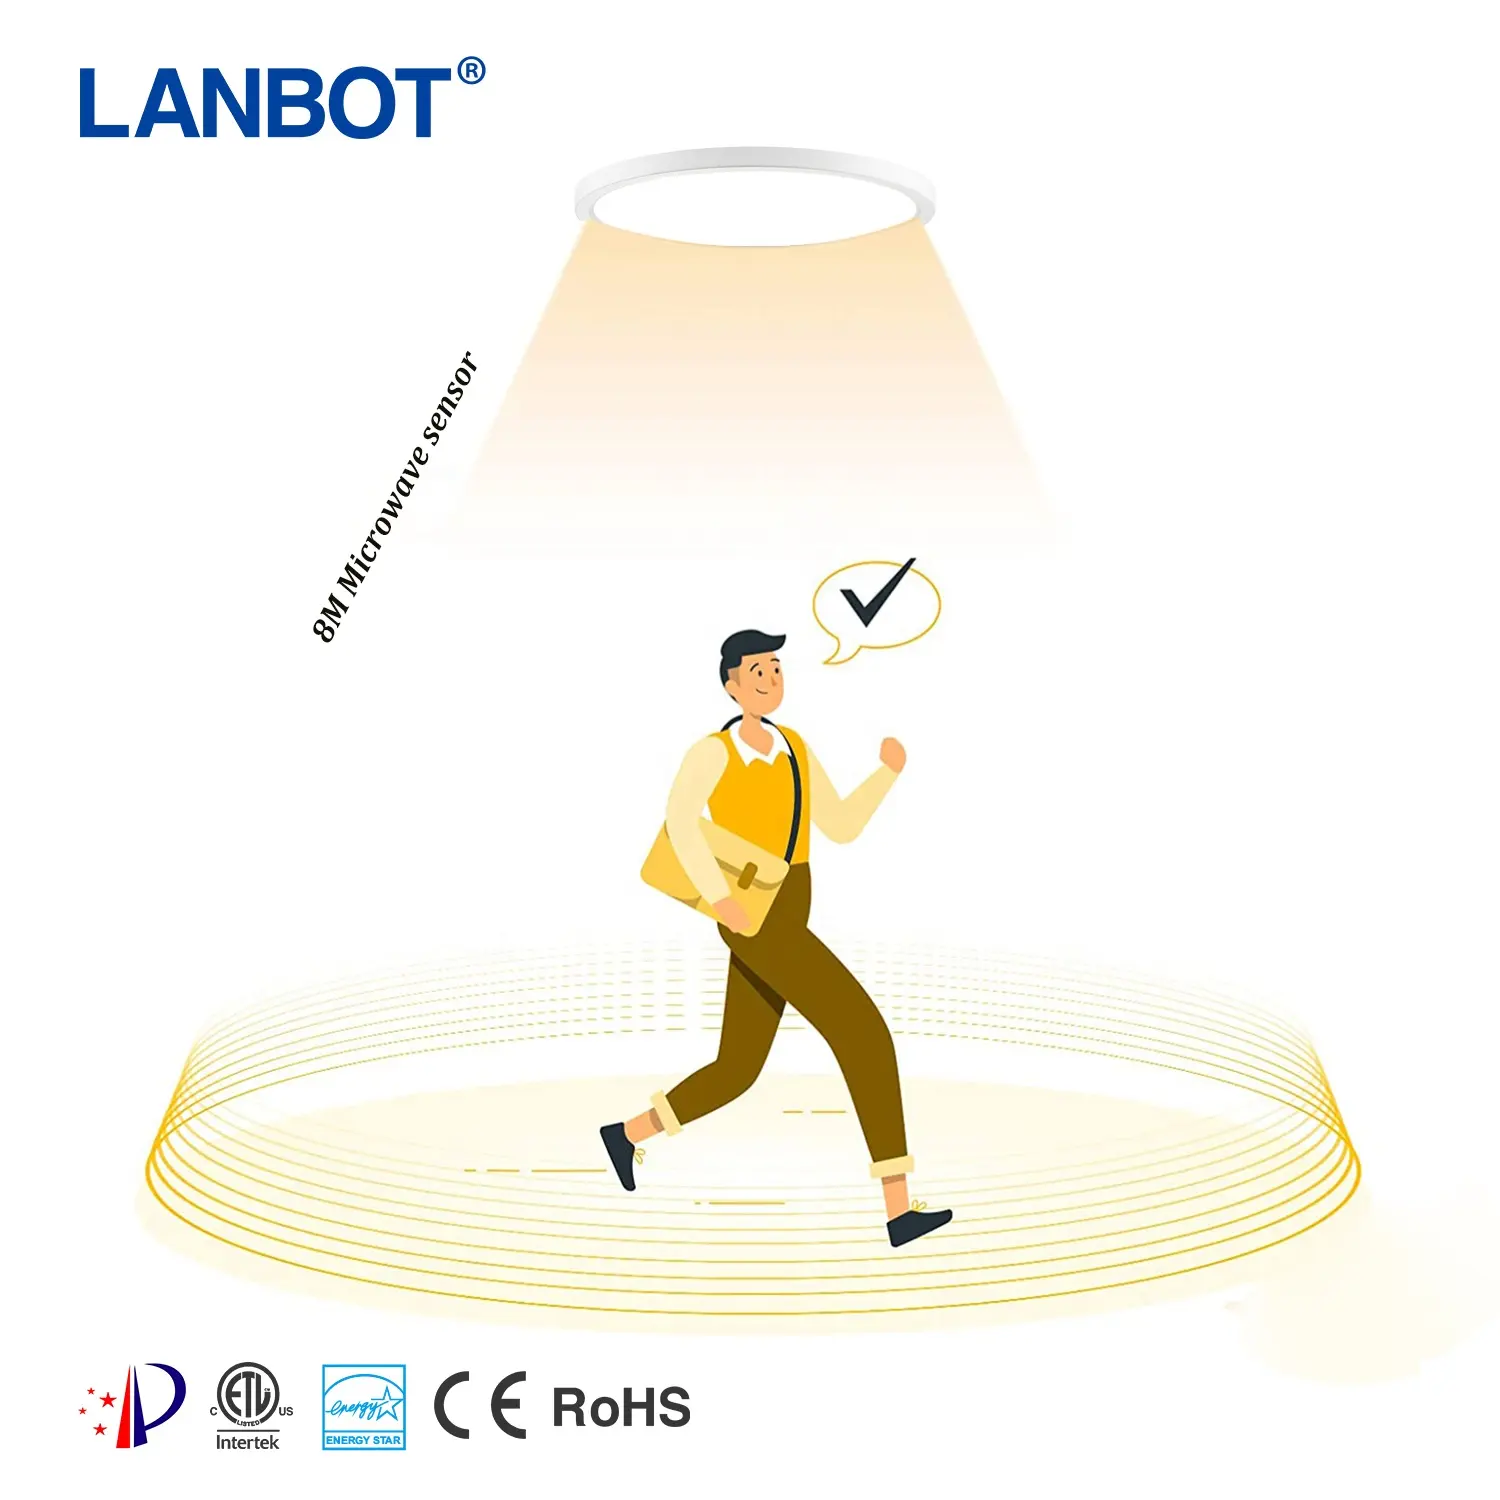 Lanbot Jason 120v 5cct 14 Inch 18w Led Ceiling Light With Dimmable And Emergency Function Flush Mount Light